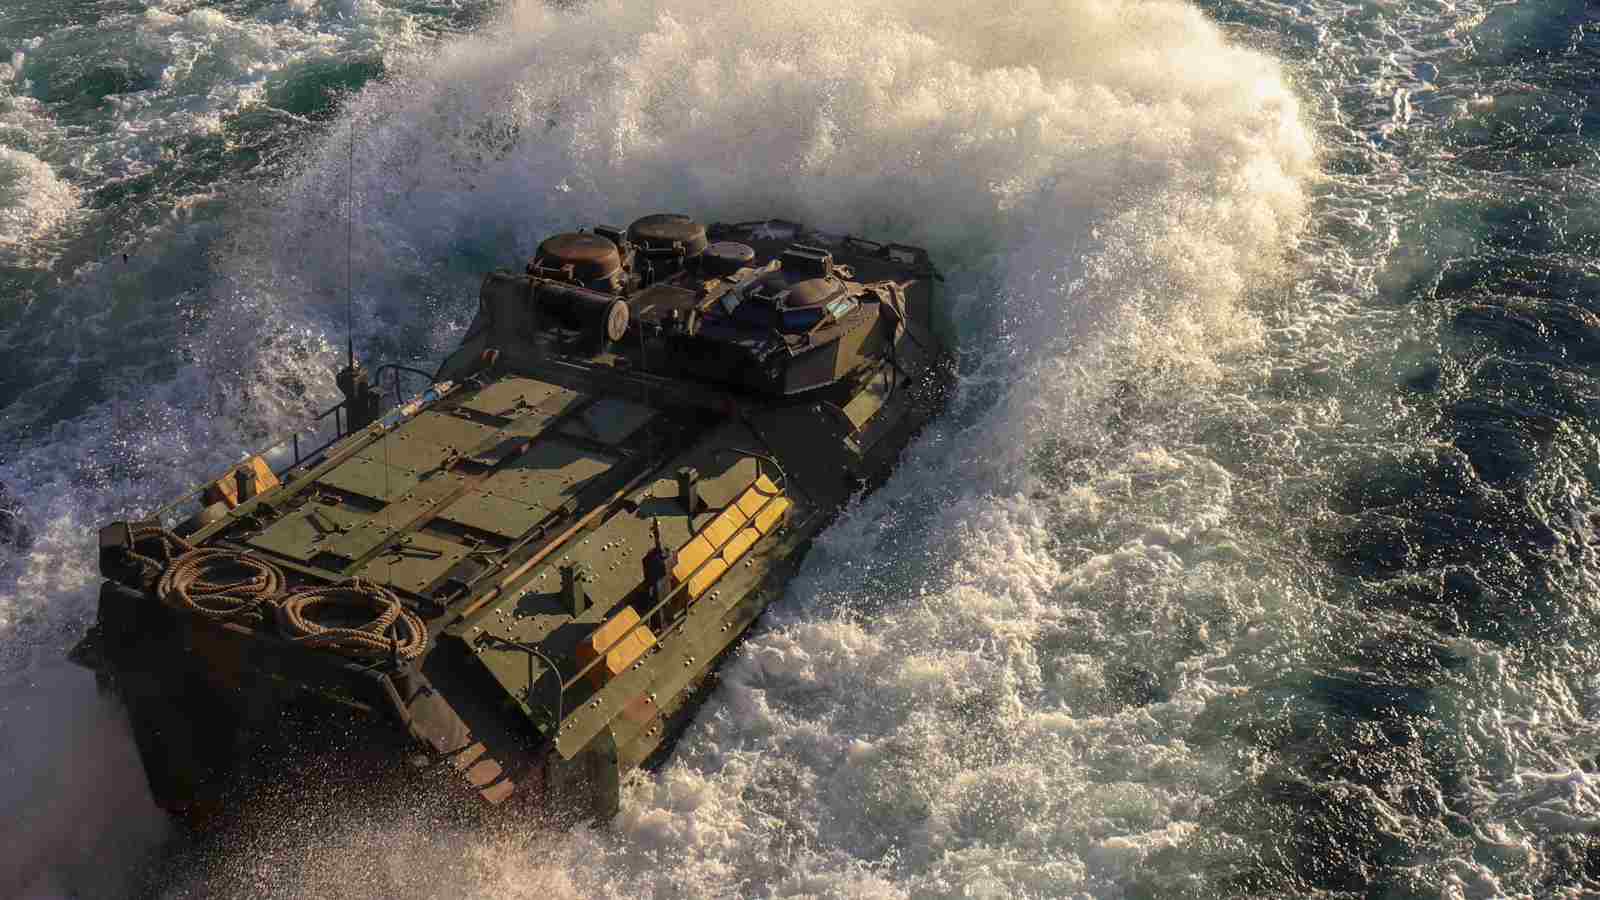 An amphibious assault vehicle, assigned to 24th Marine Expeditionary Unit, disembark the San Antonio-class amphibious transport dock ship USS New York (LPD 21) October 30, 2018. USS New York (LPD 21) is participating in Trident Juncture 2018. Trident Juncture 18 is a NATO-led exercise designed to certify NATO response forces and develop interoperability among participating NATO and partner nations.
U.S. Navy photo by Aviation Boatswain’s Mate (Handling) 3rd Class Lyndon Schwartz